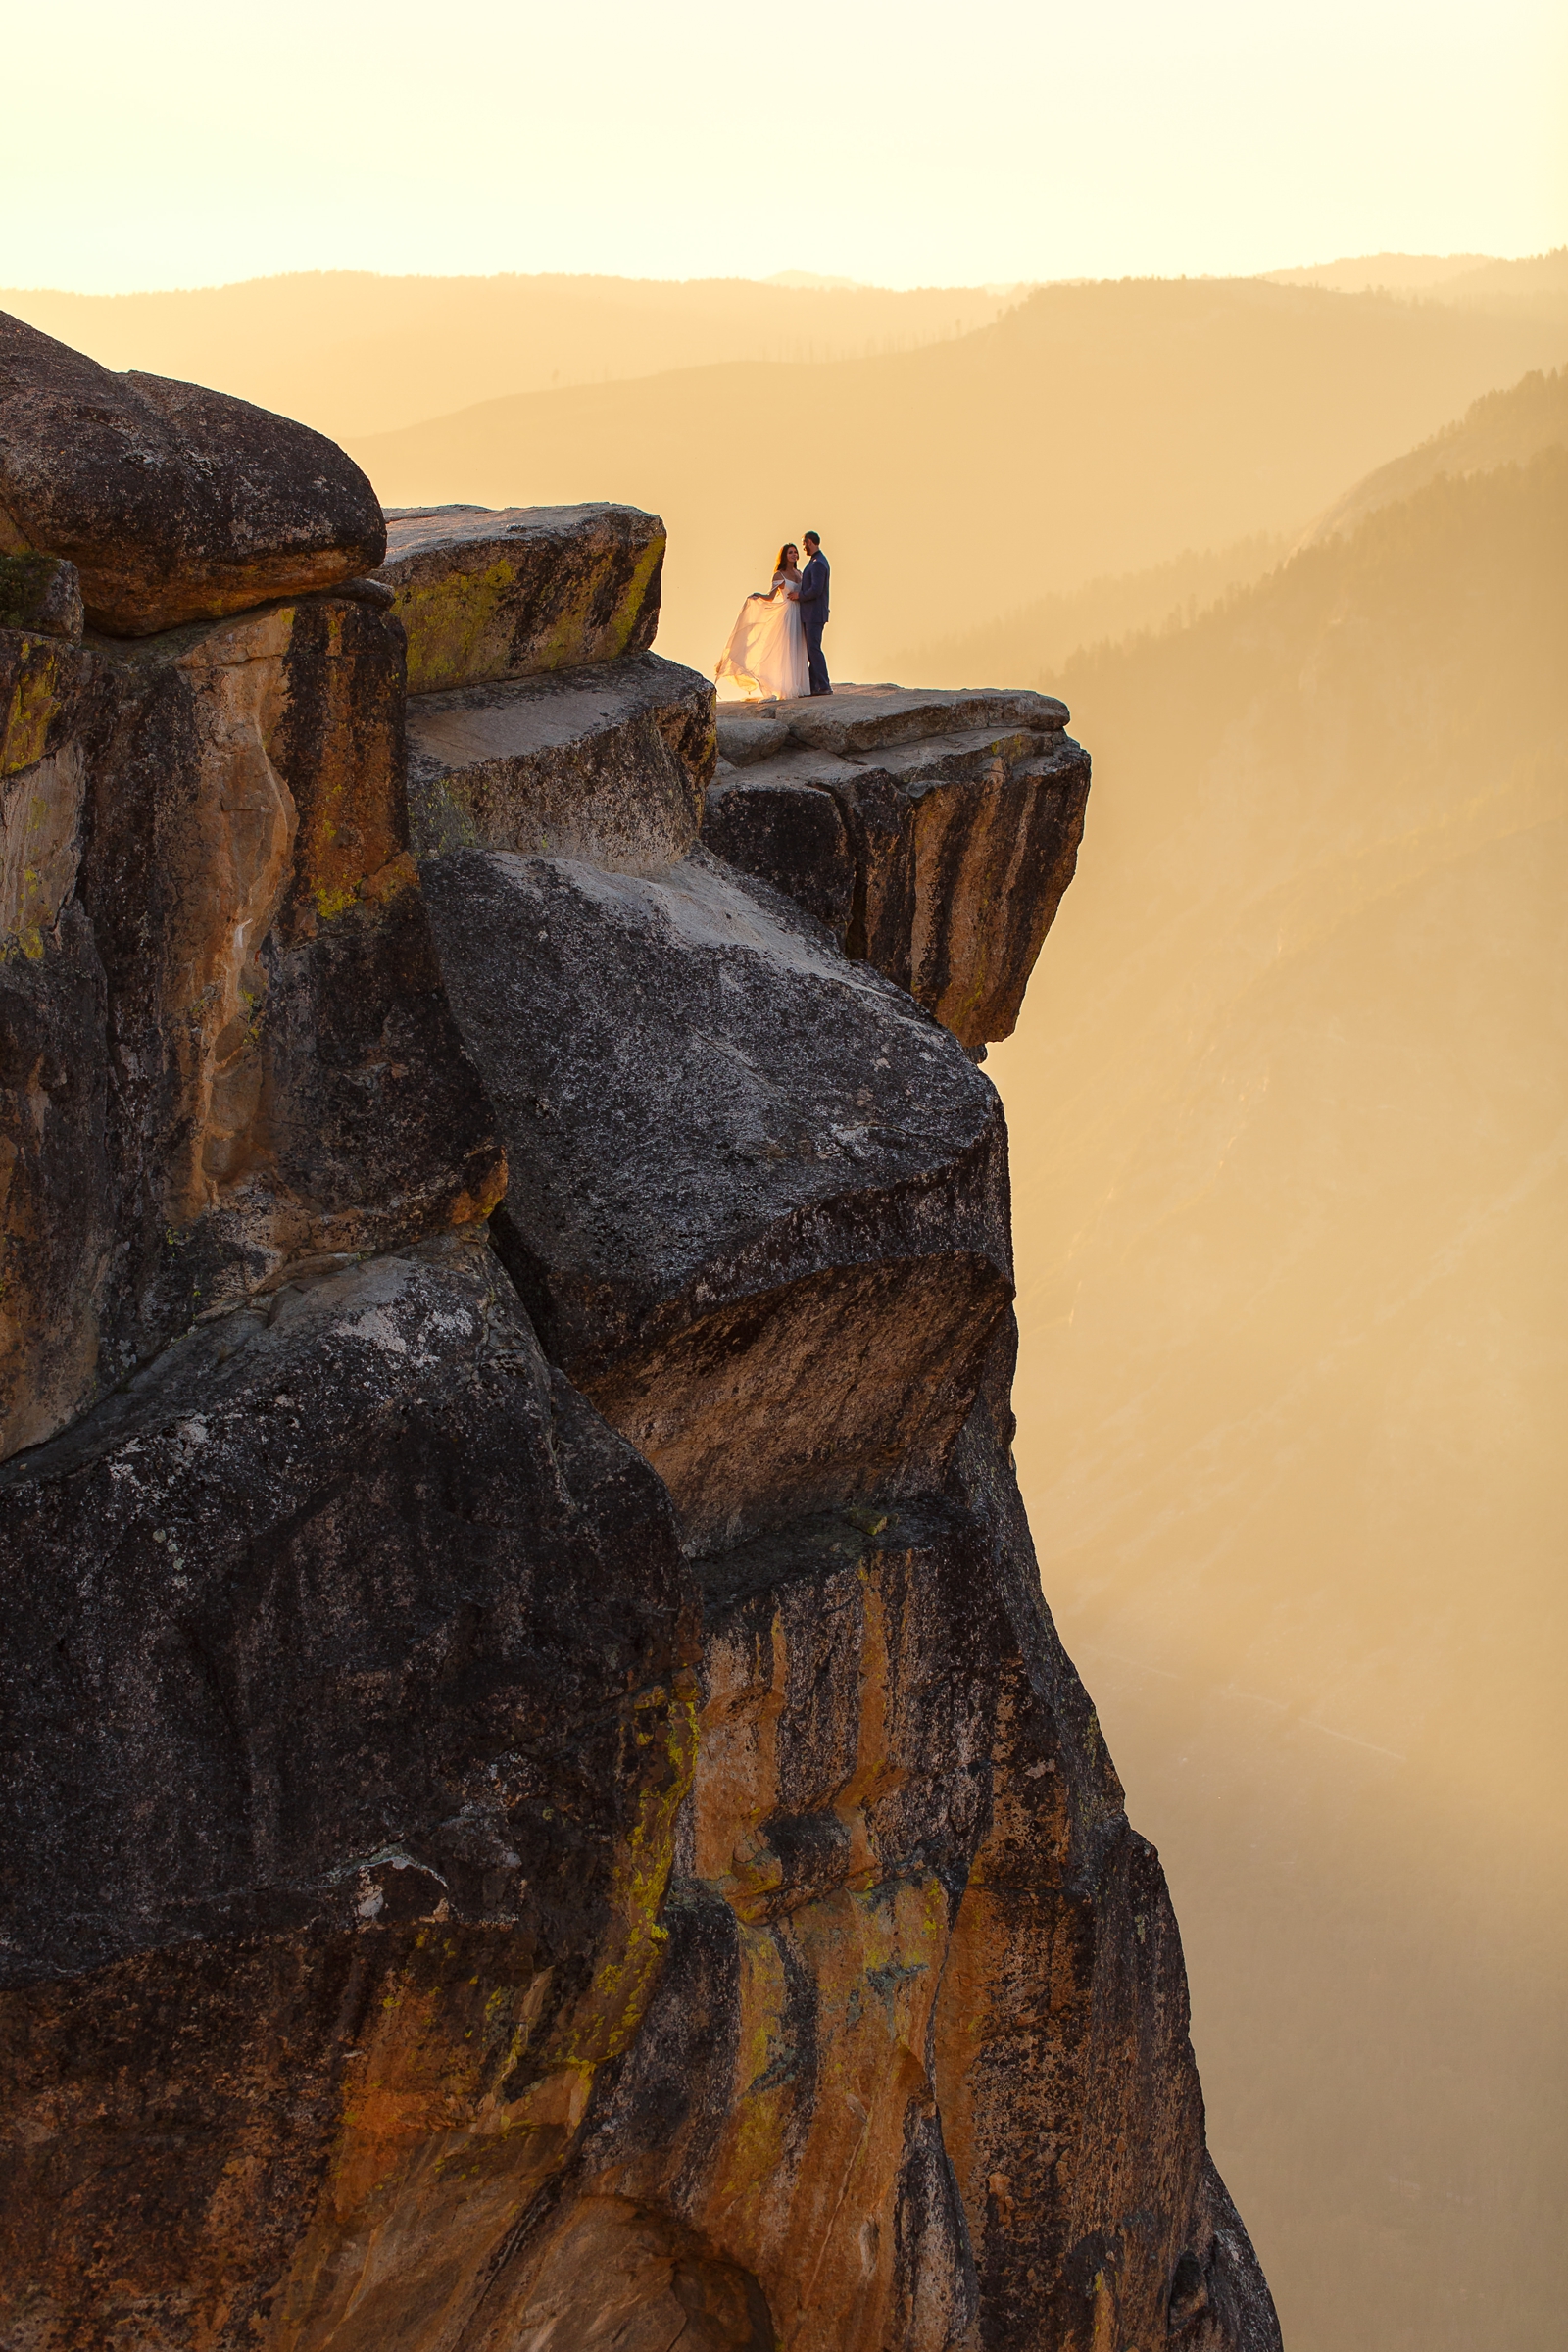 Gorgeous sunset elopement at Taft Point in Yosemite NP.